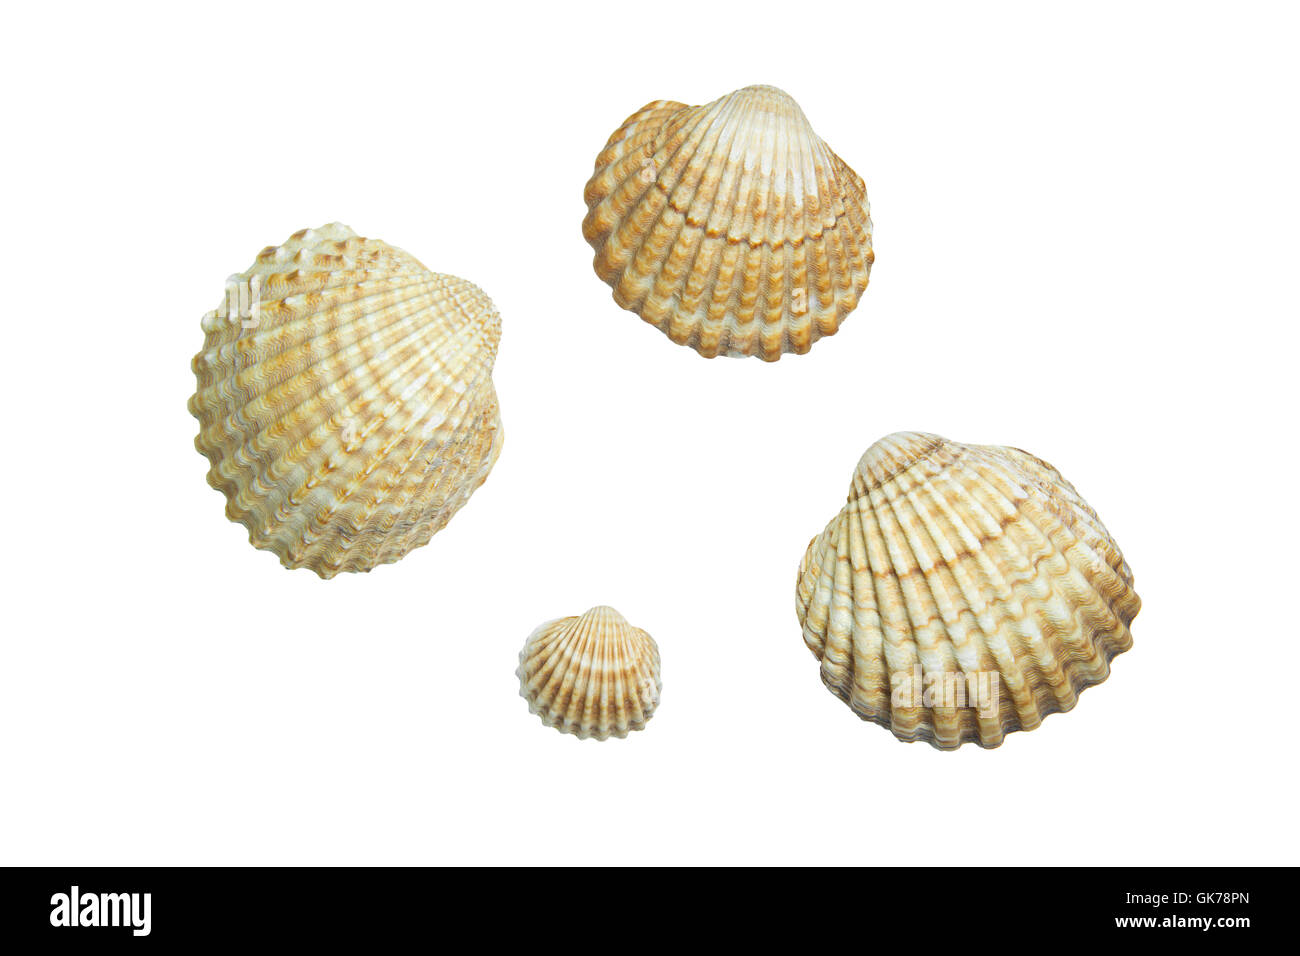 shells exempted Stock Photo